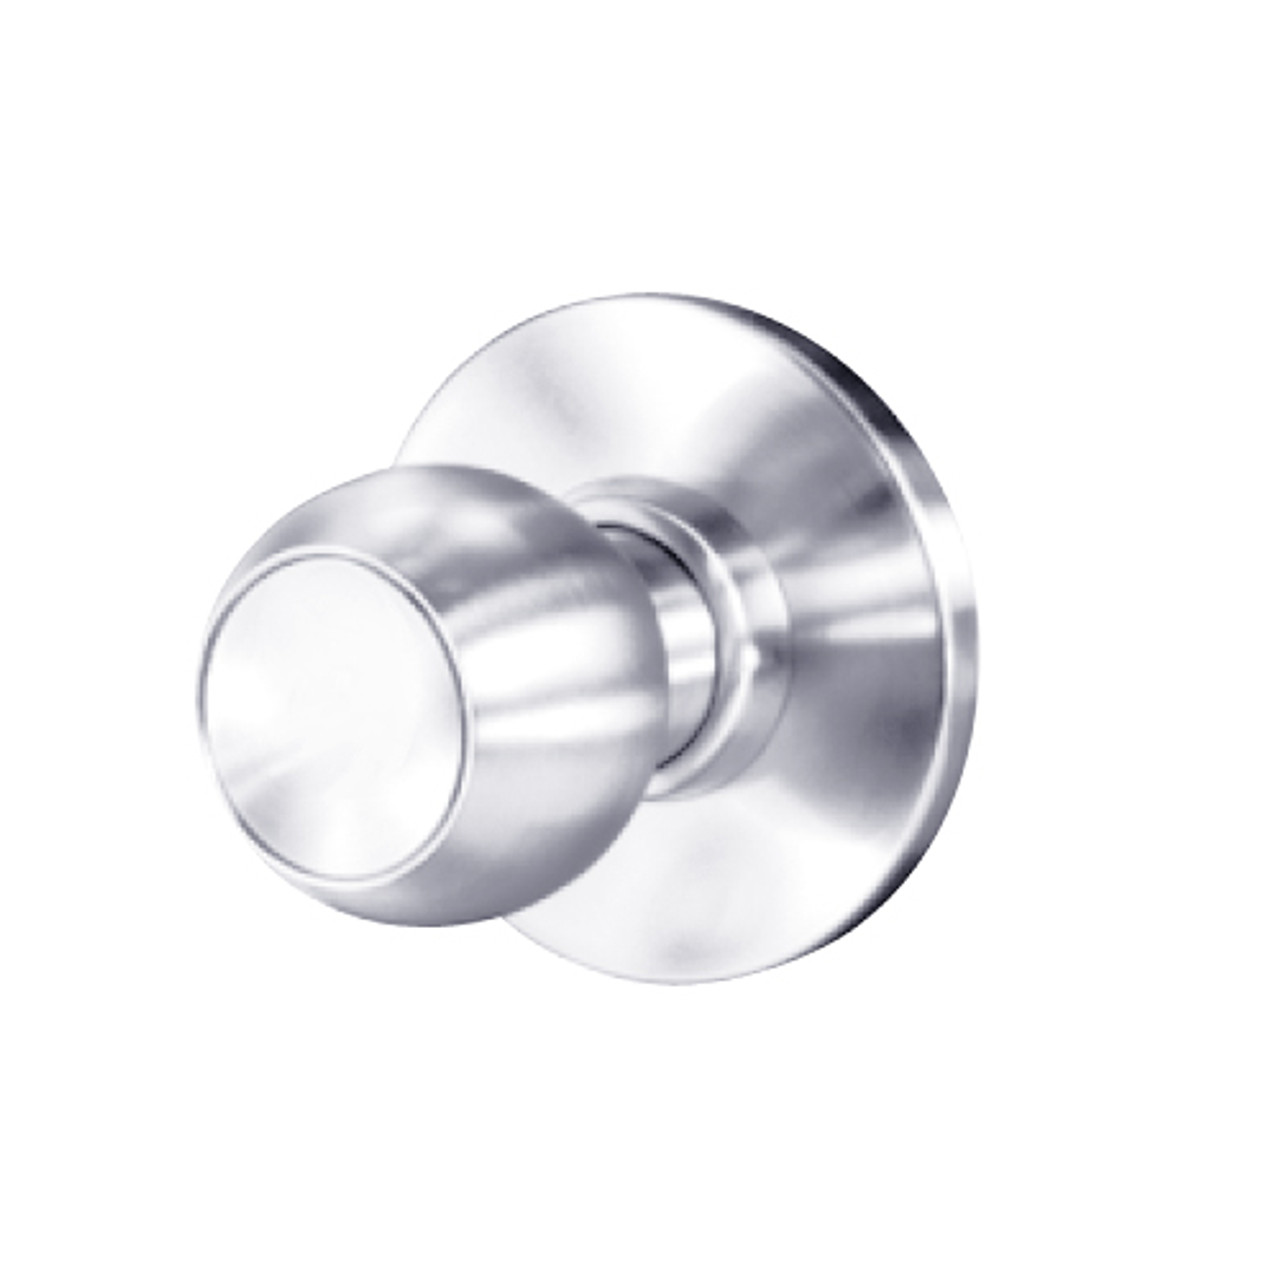 8K30M4AS3625 Best 8K Series Communicating Heavy Duty Cylindrical Knob Locks with Round Style in Bright Chrome